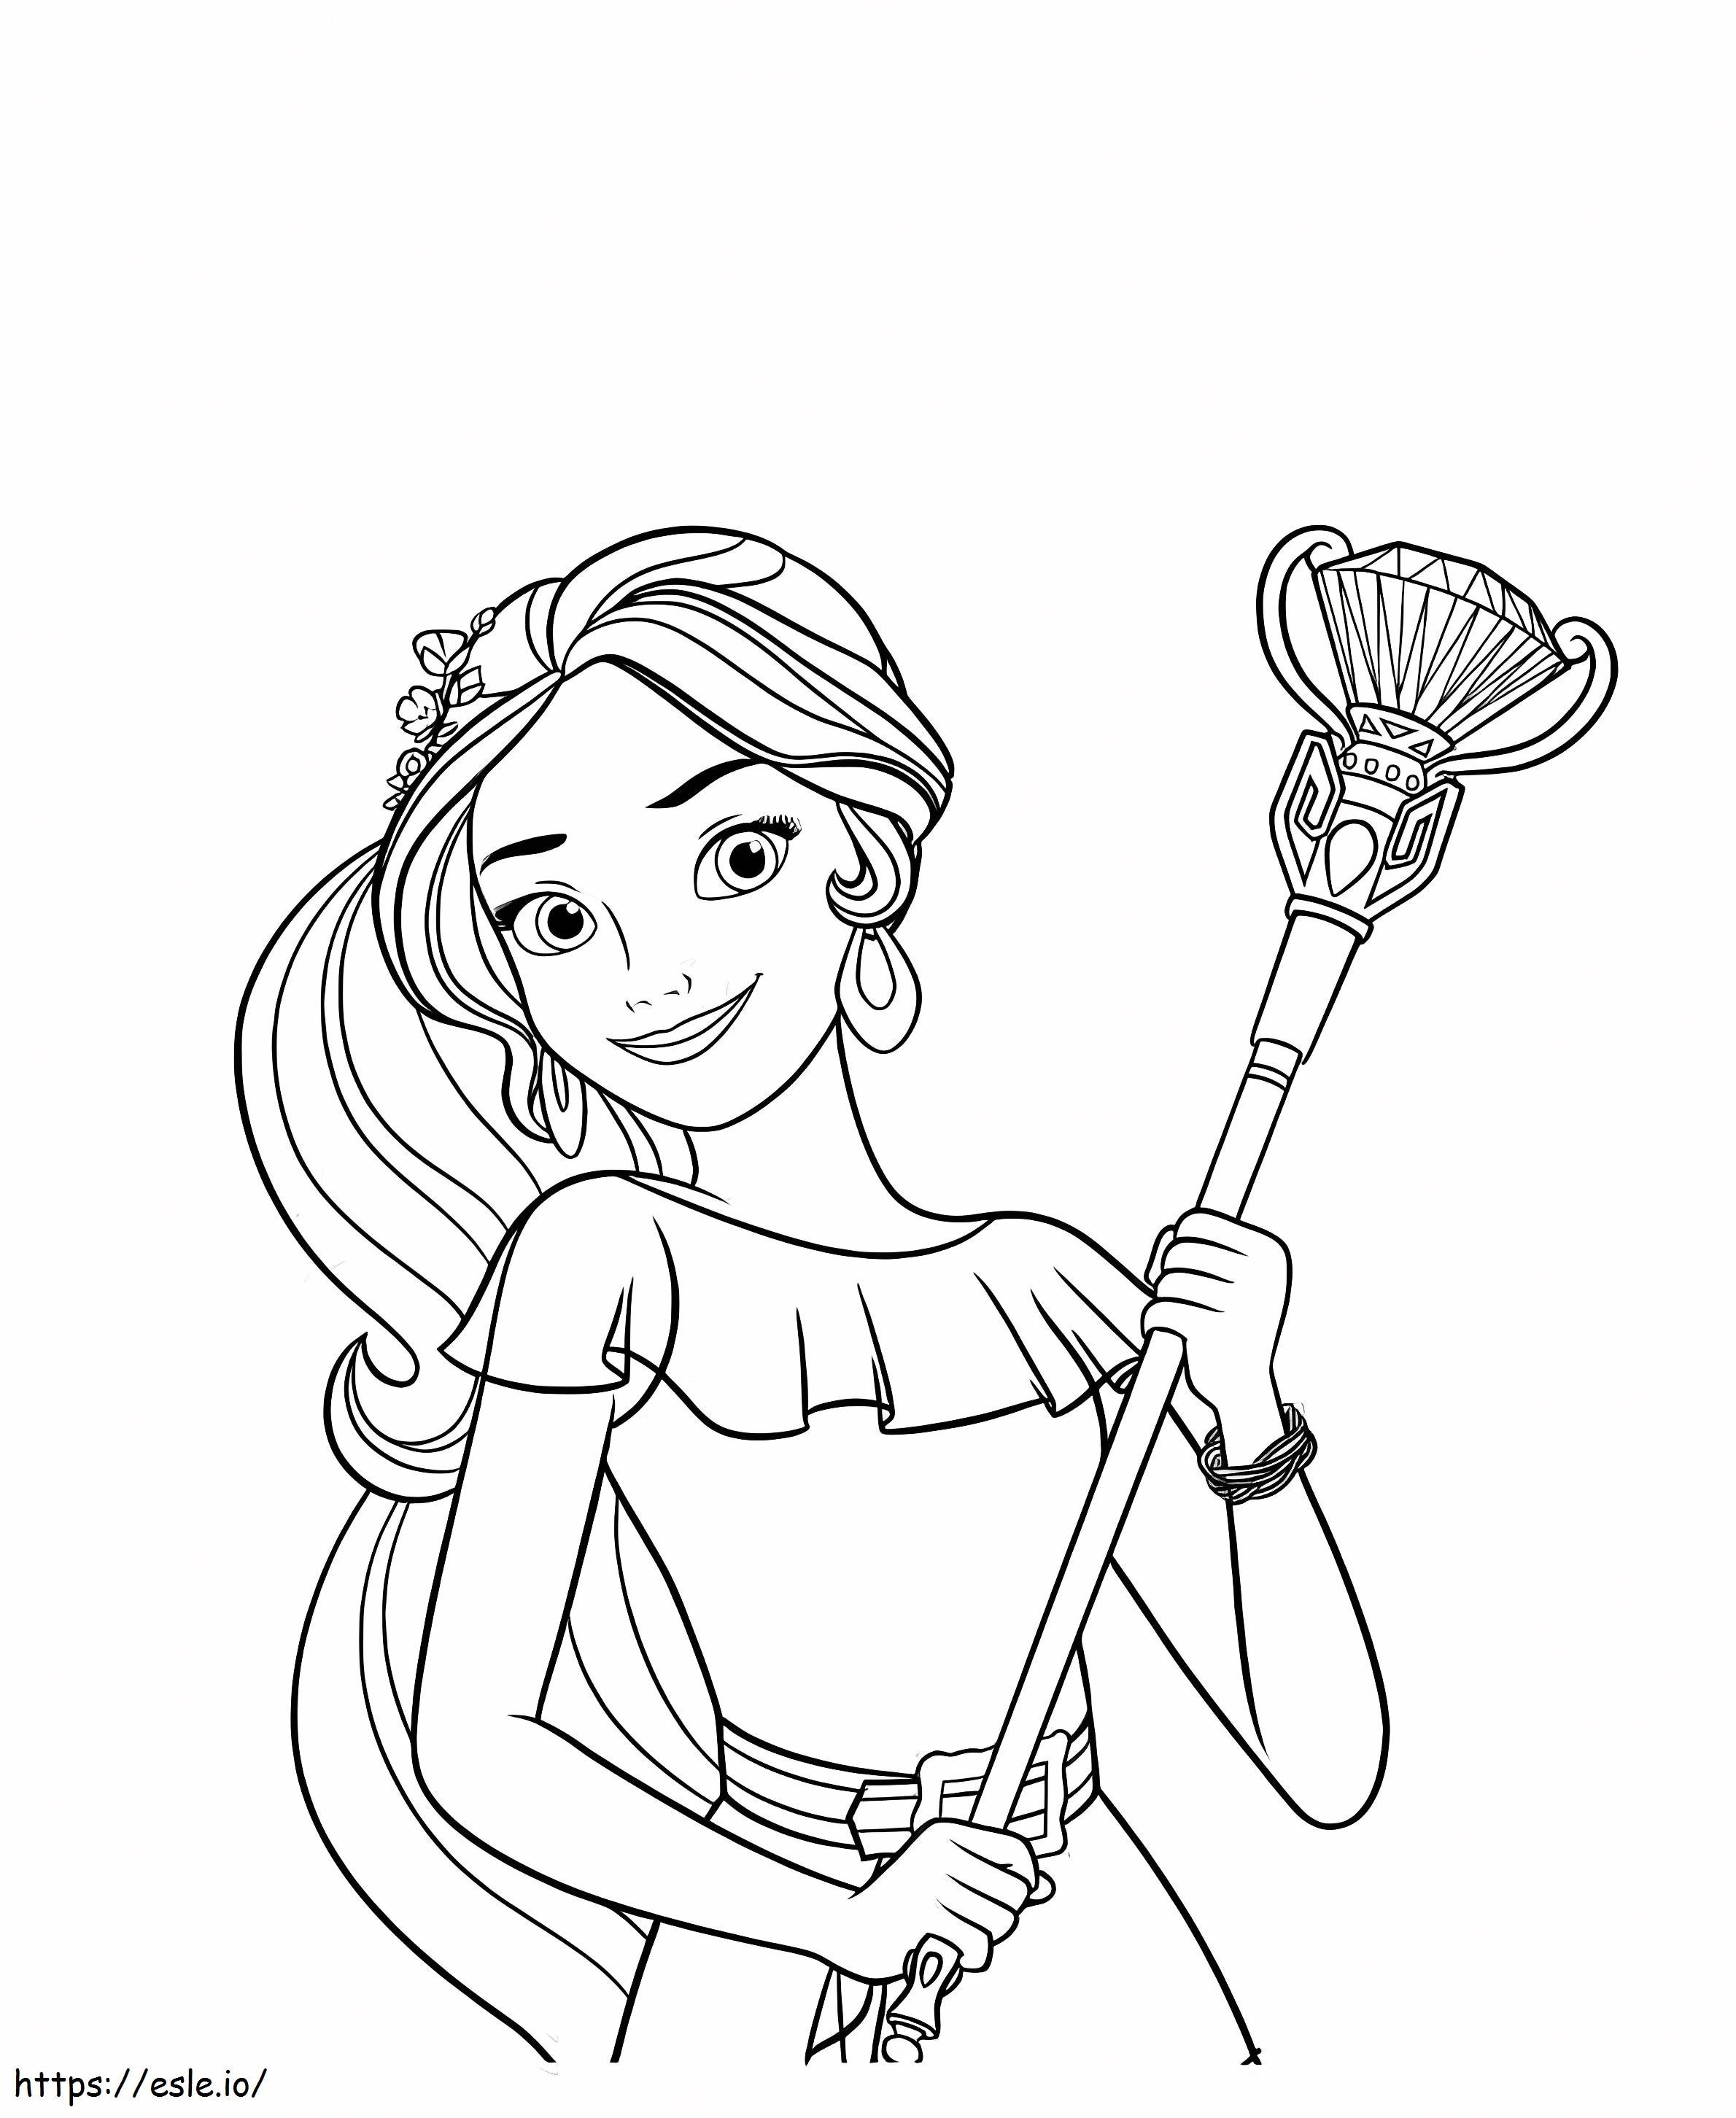 Face Elena Smiling coloring page